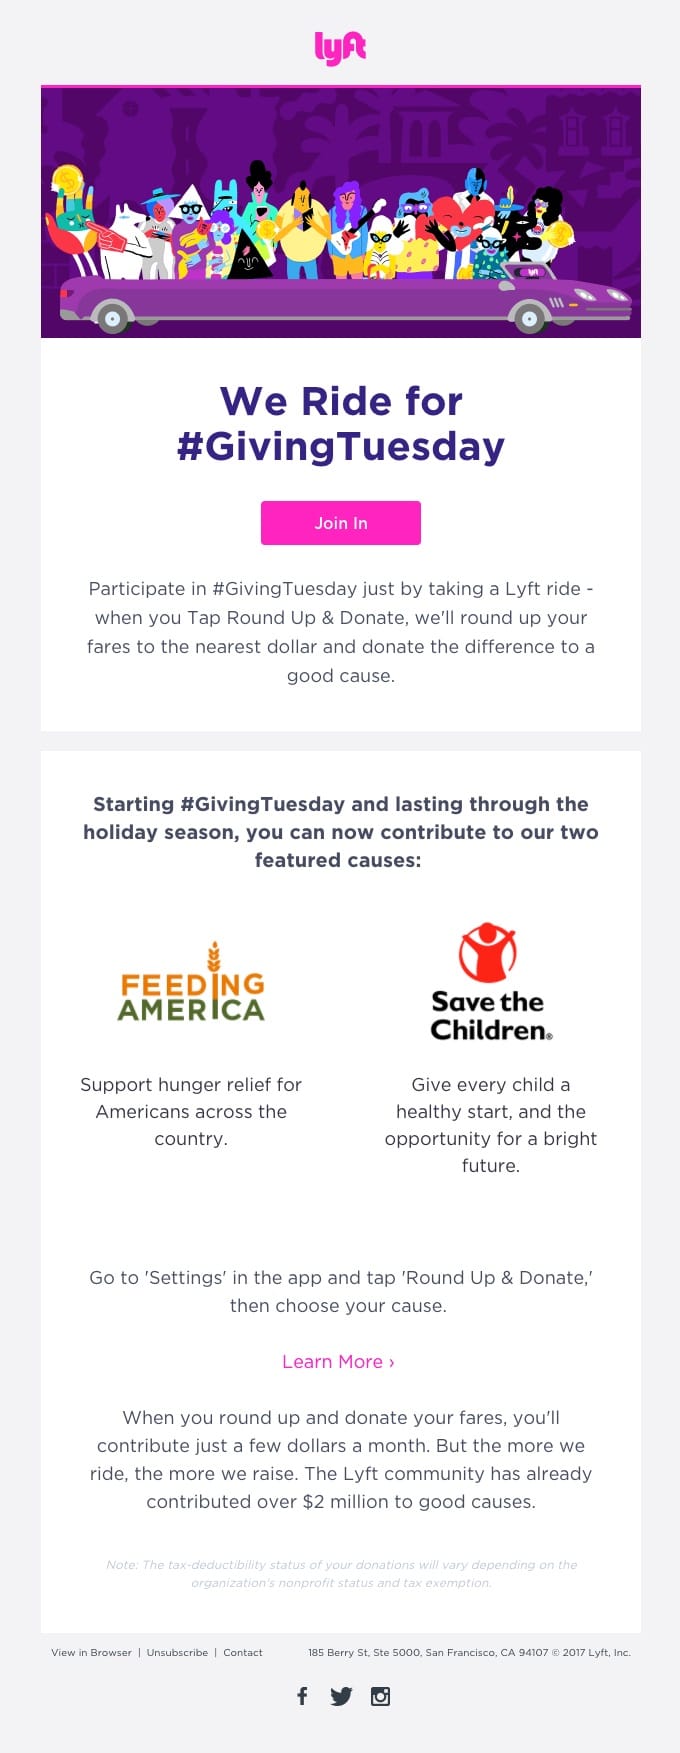  Lyft makes it easy for their customers to take part in Giving Tuesday